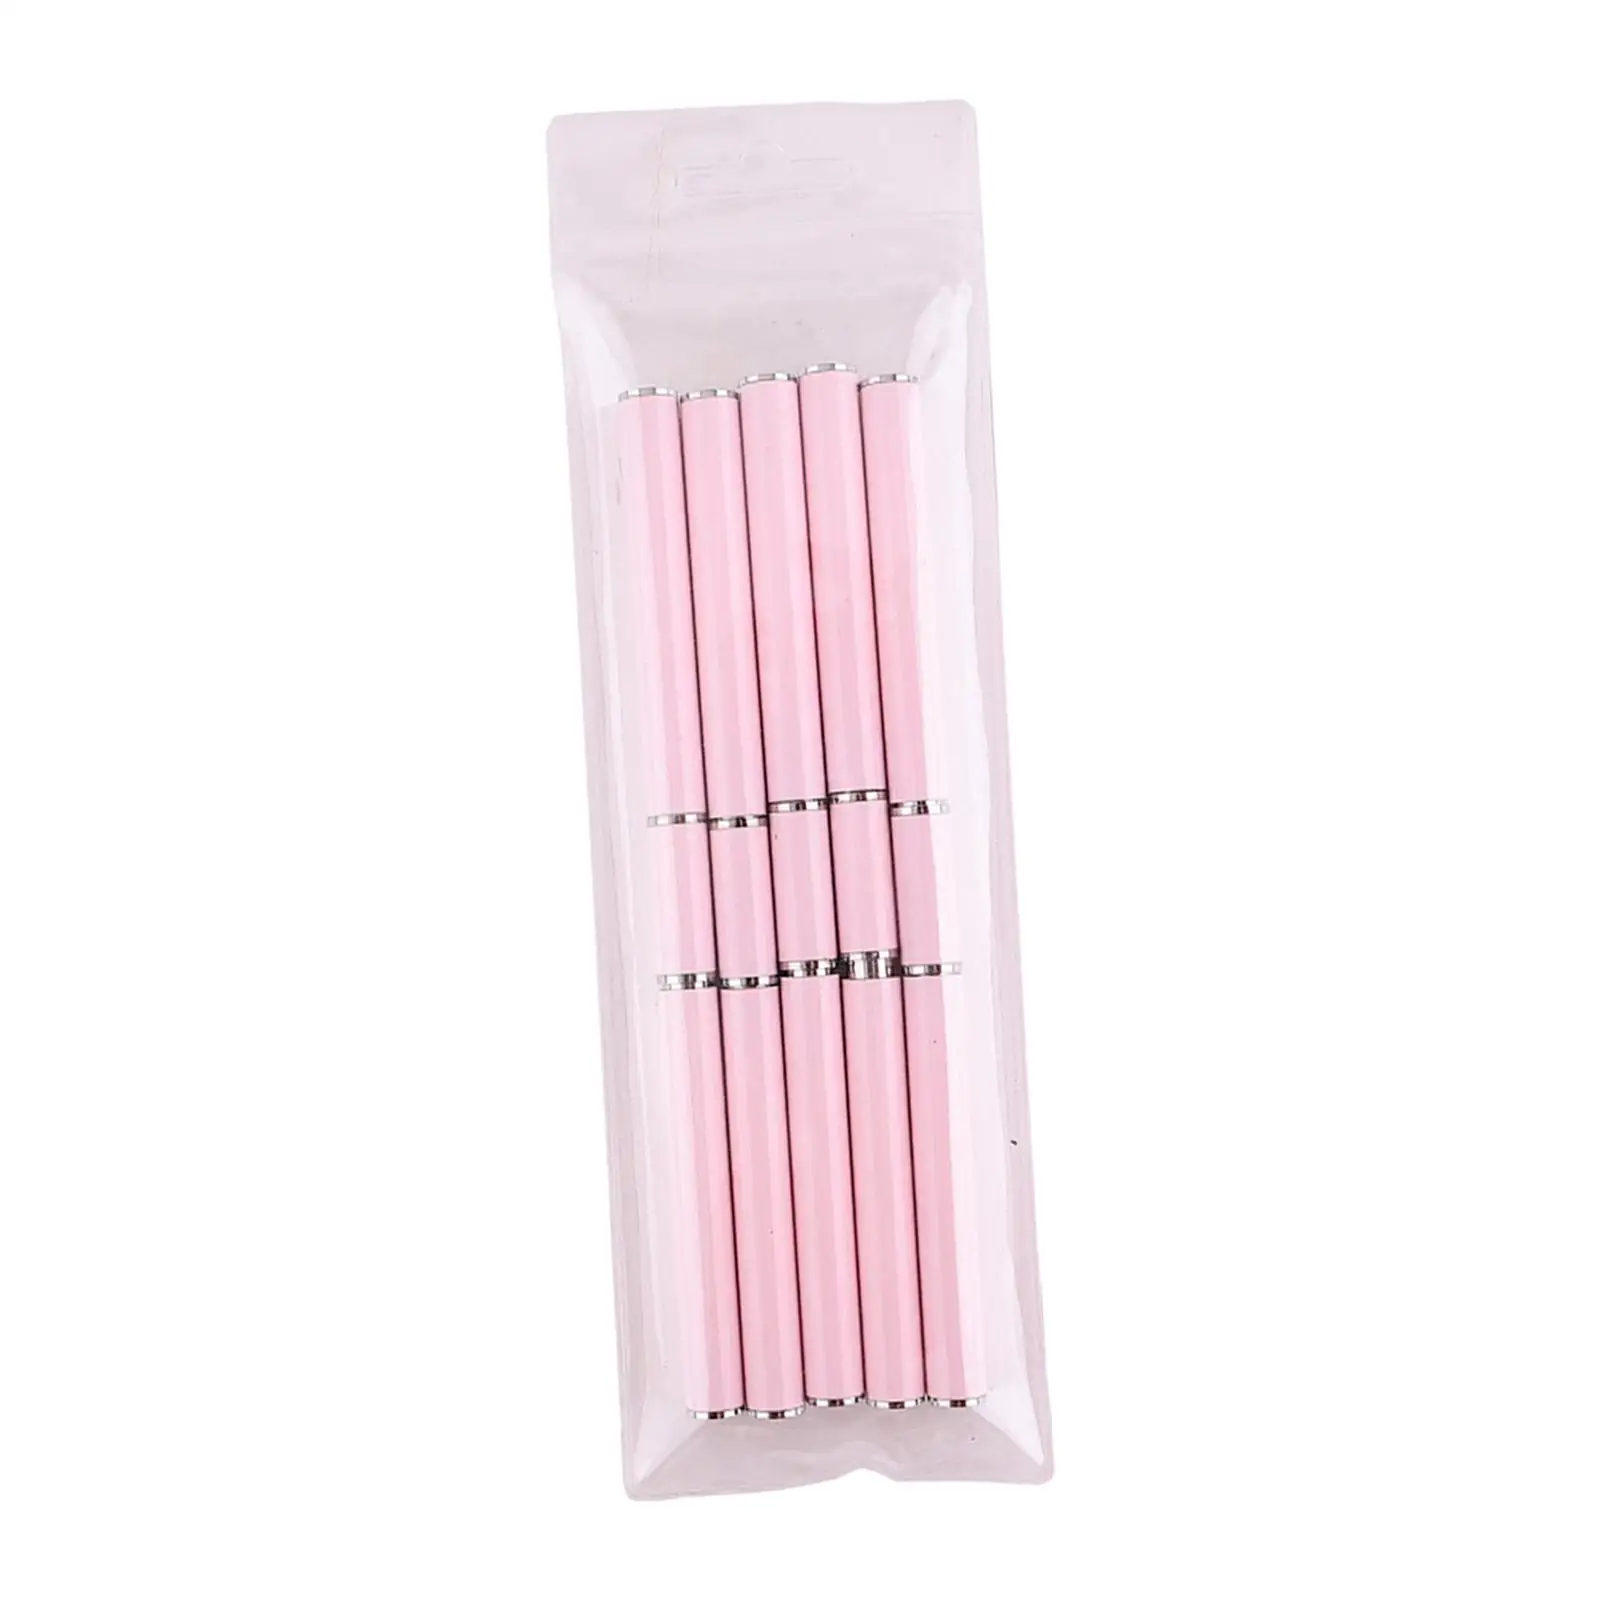 5 Pieces Double Ended Nail Art Brushes for Professional Nail Salon Home Use